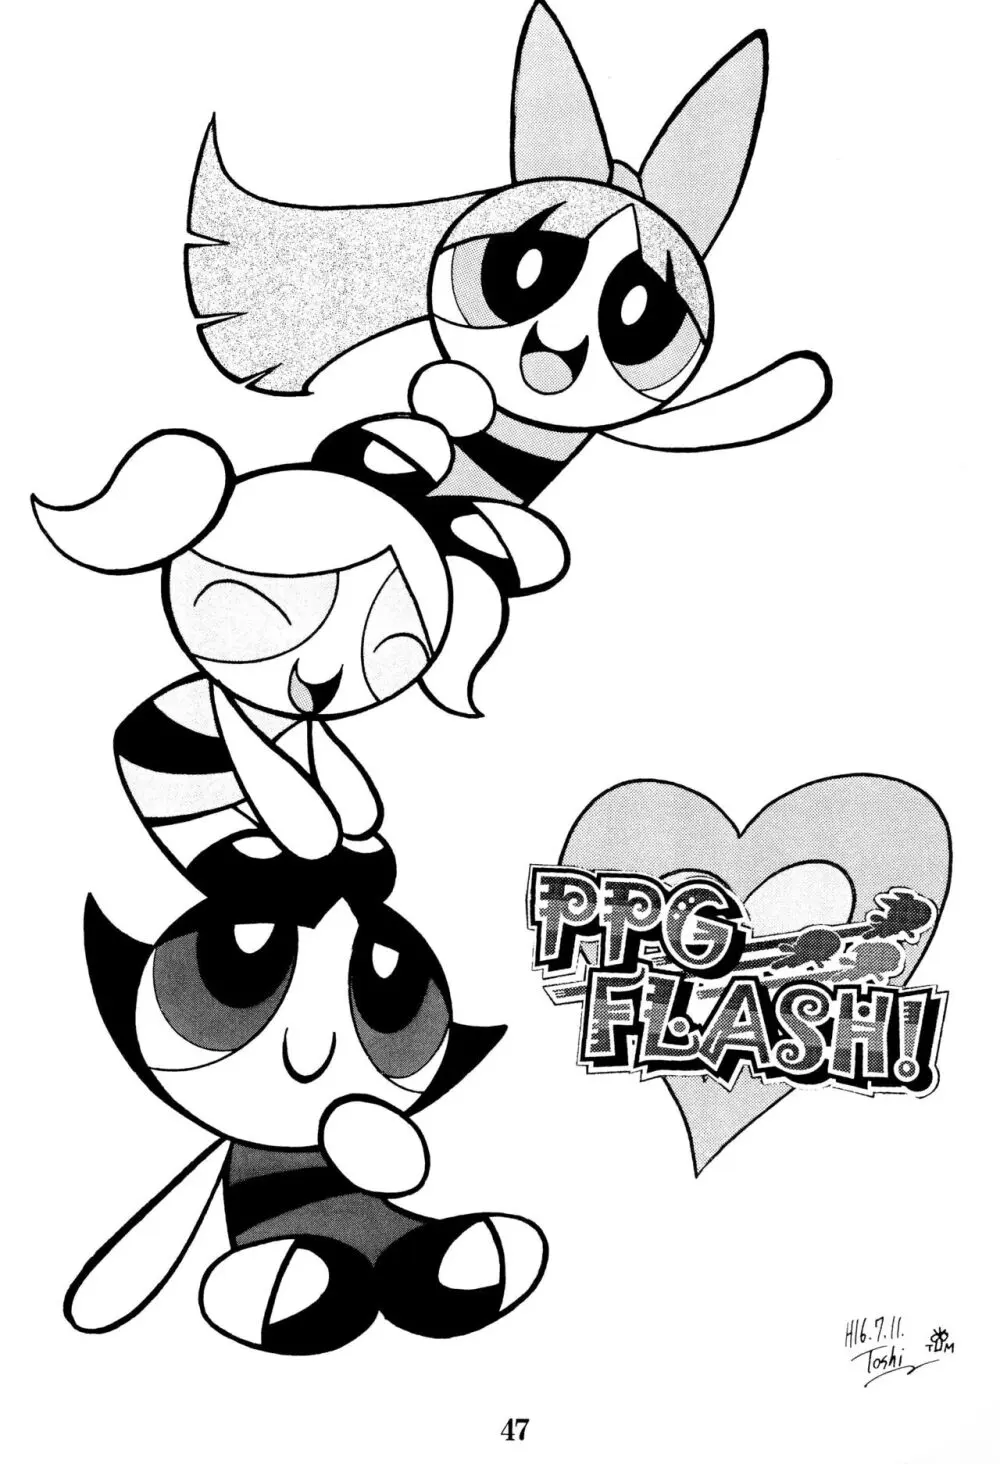 PPG FLASH! - page49